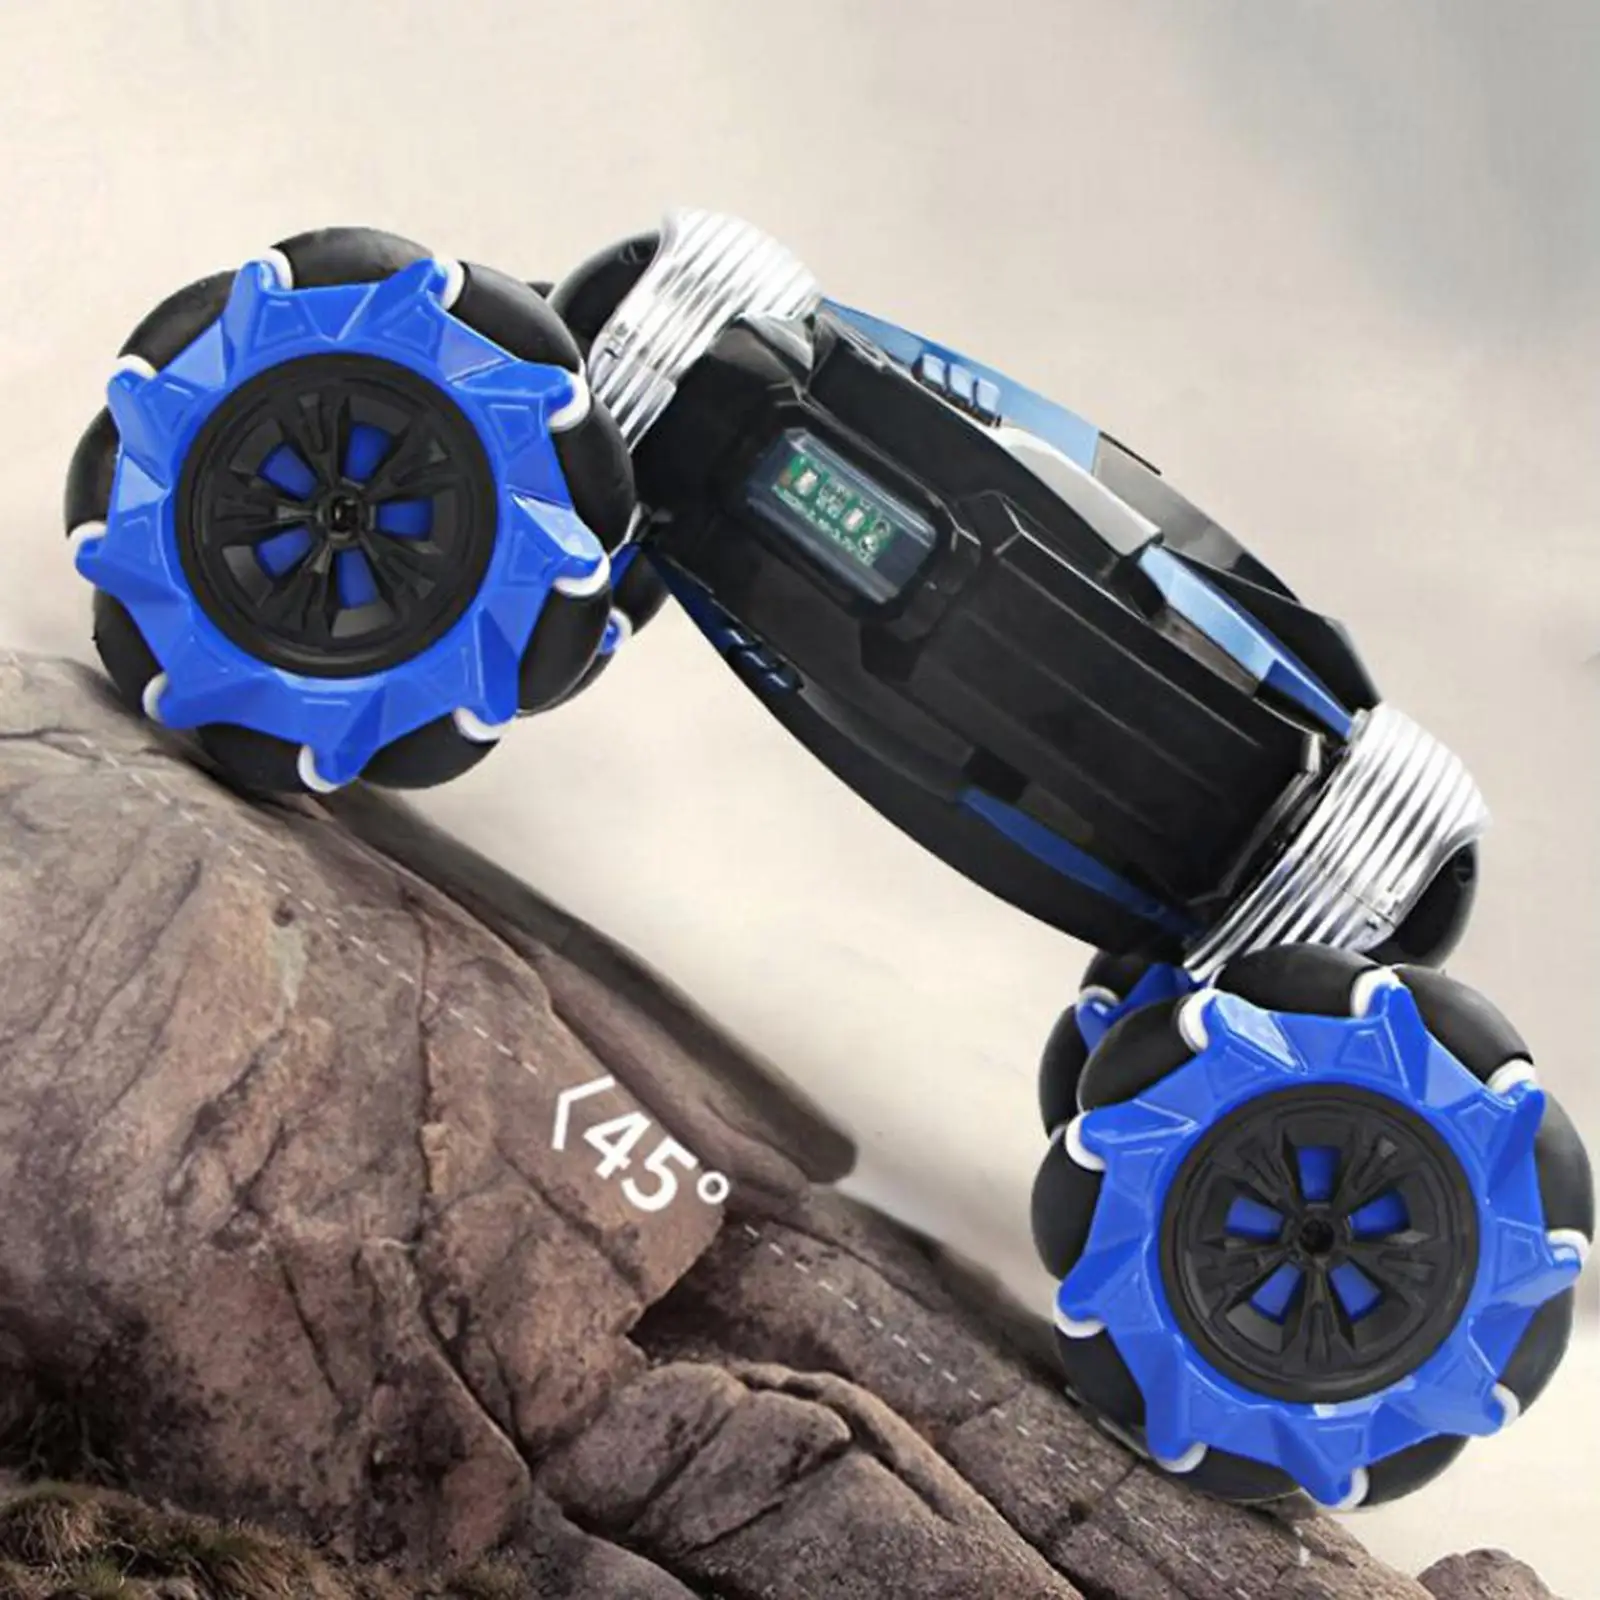 Remote Control Car,Off Road RC Crawler 4WD 2 Motors 2.4Ghz Gesture Control Truck Climbing RC Car Toy for Age 7-14 Boy Girl Teen